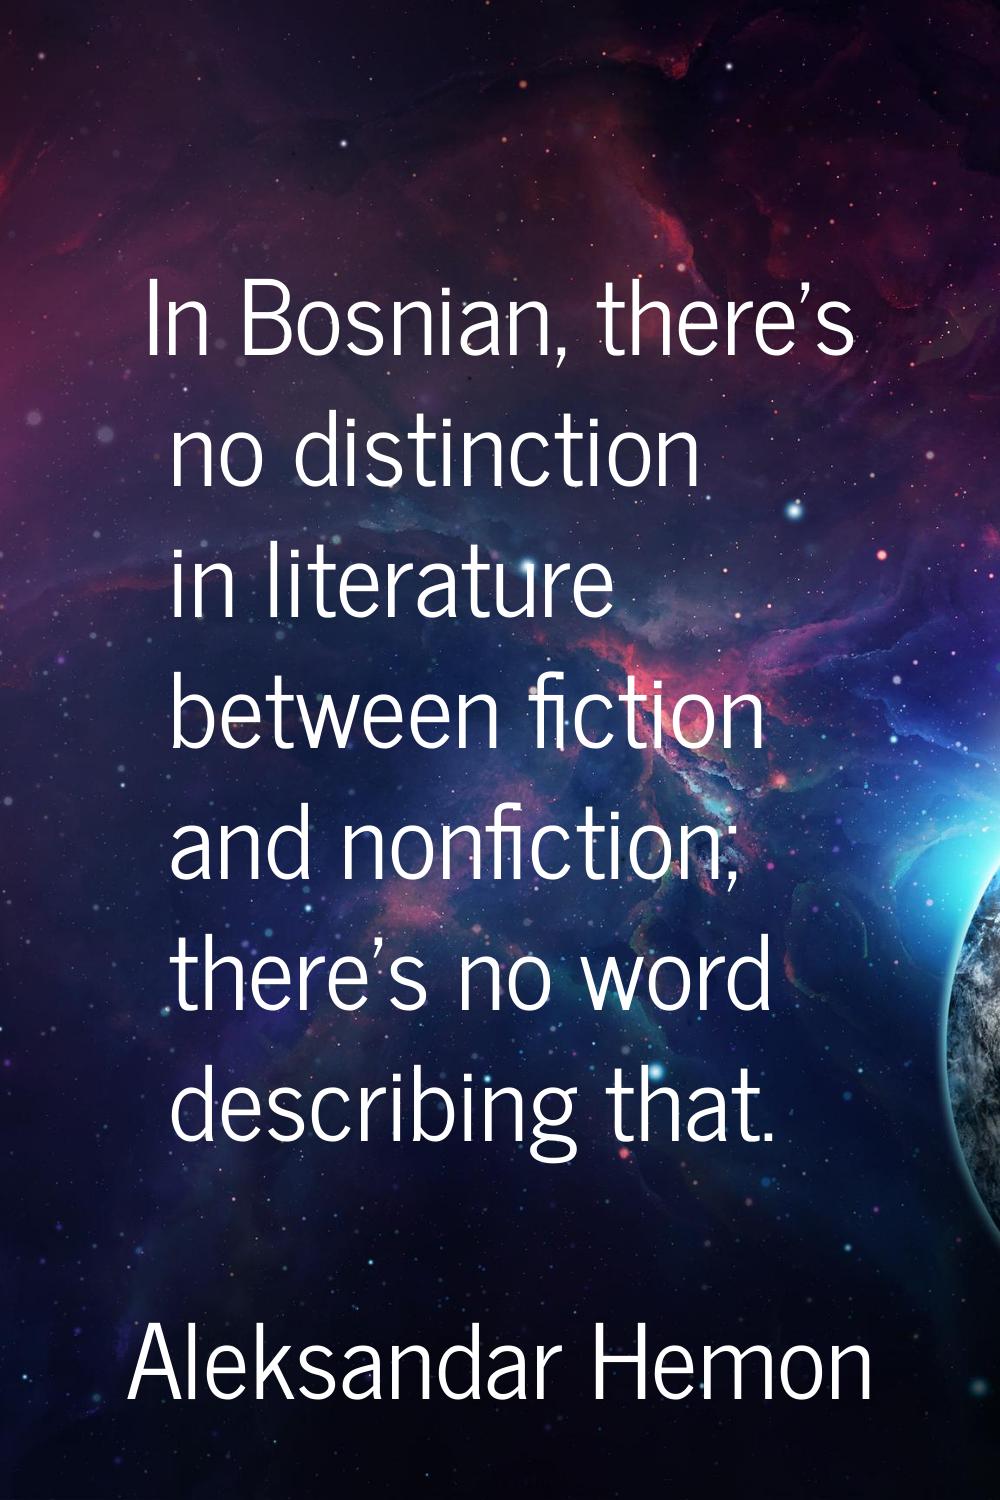 In Bosnian, there's no distinction in literature between fiction and nonfiction; there's no word de